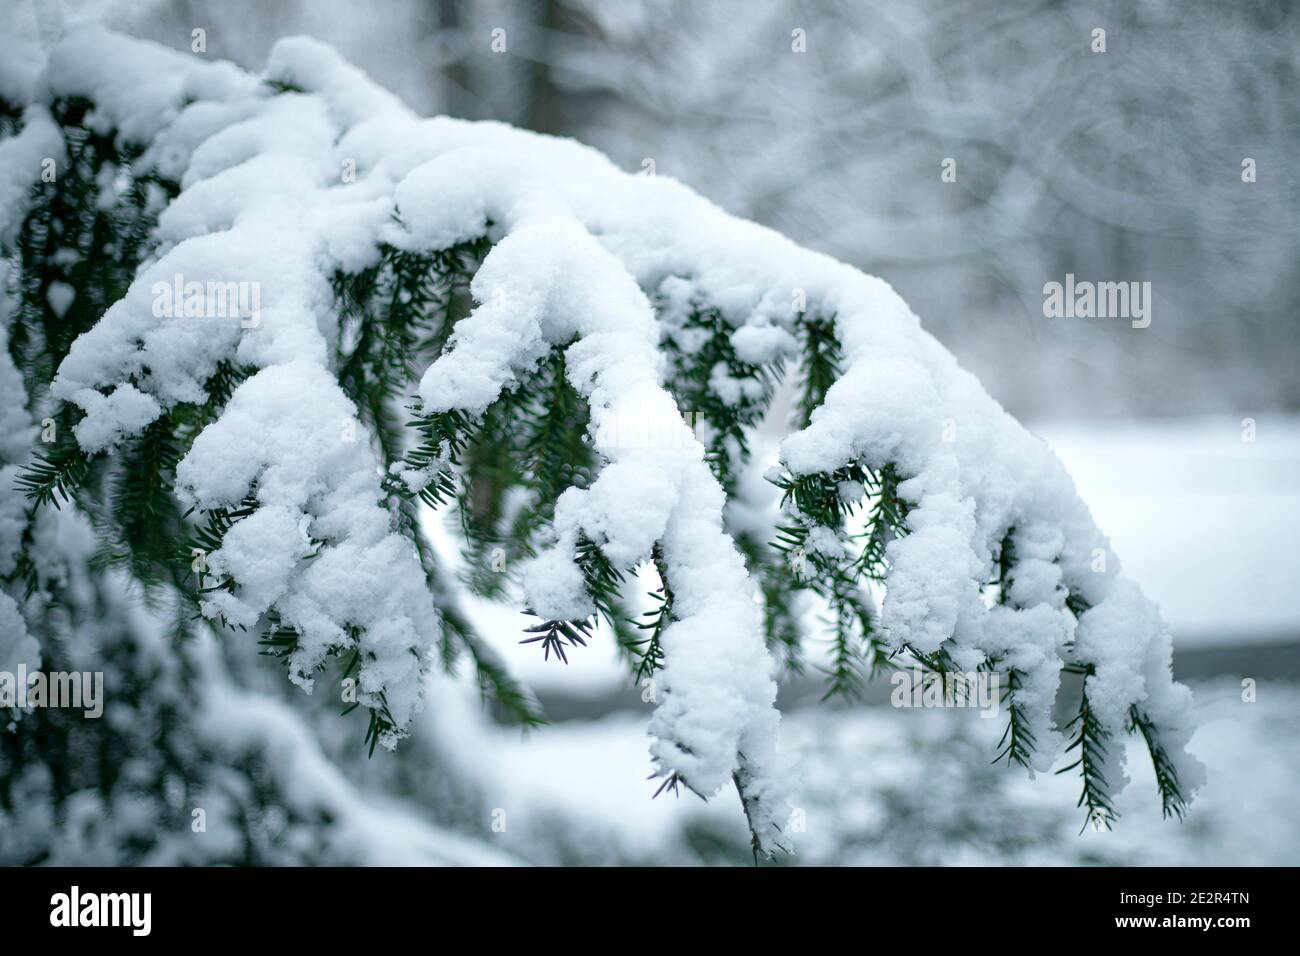 Details of Christmas tree branches covered with snow and frost in cold, winter tones Stock Photo